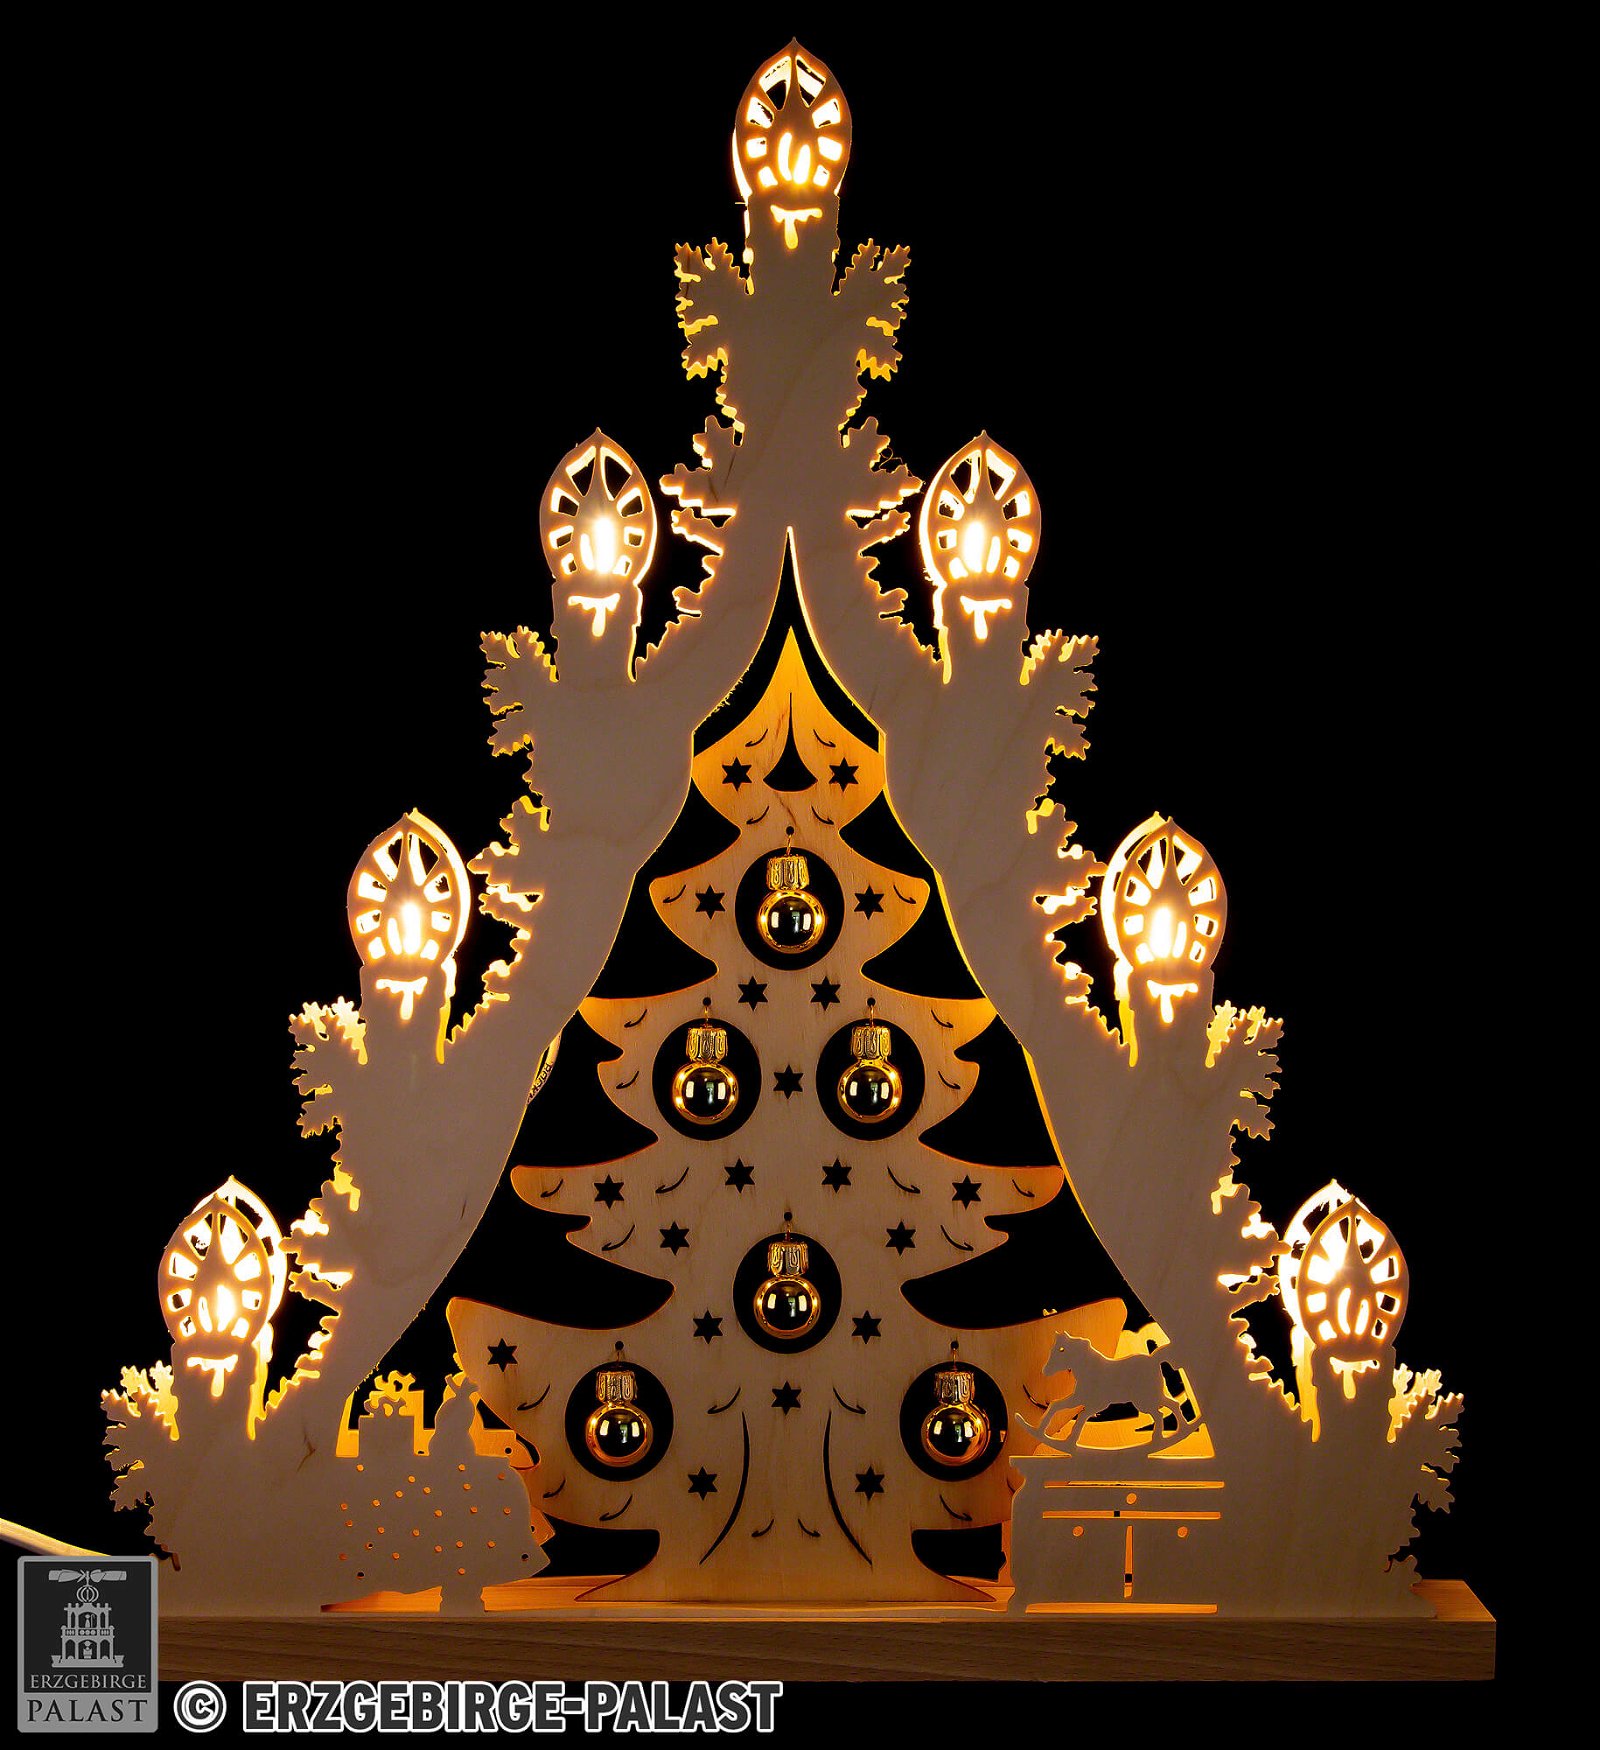 Triangle “Christmas cm/15×17.3in) Tree with (38×44 Baubles” by Holzkunst Golden Light Weigla